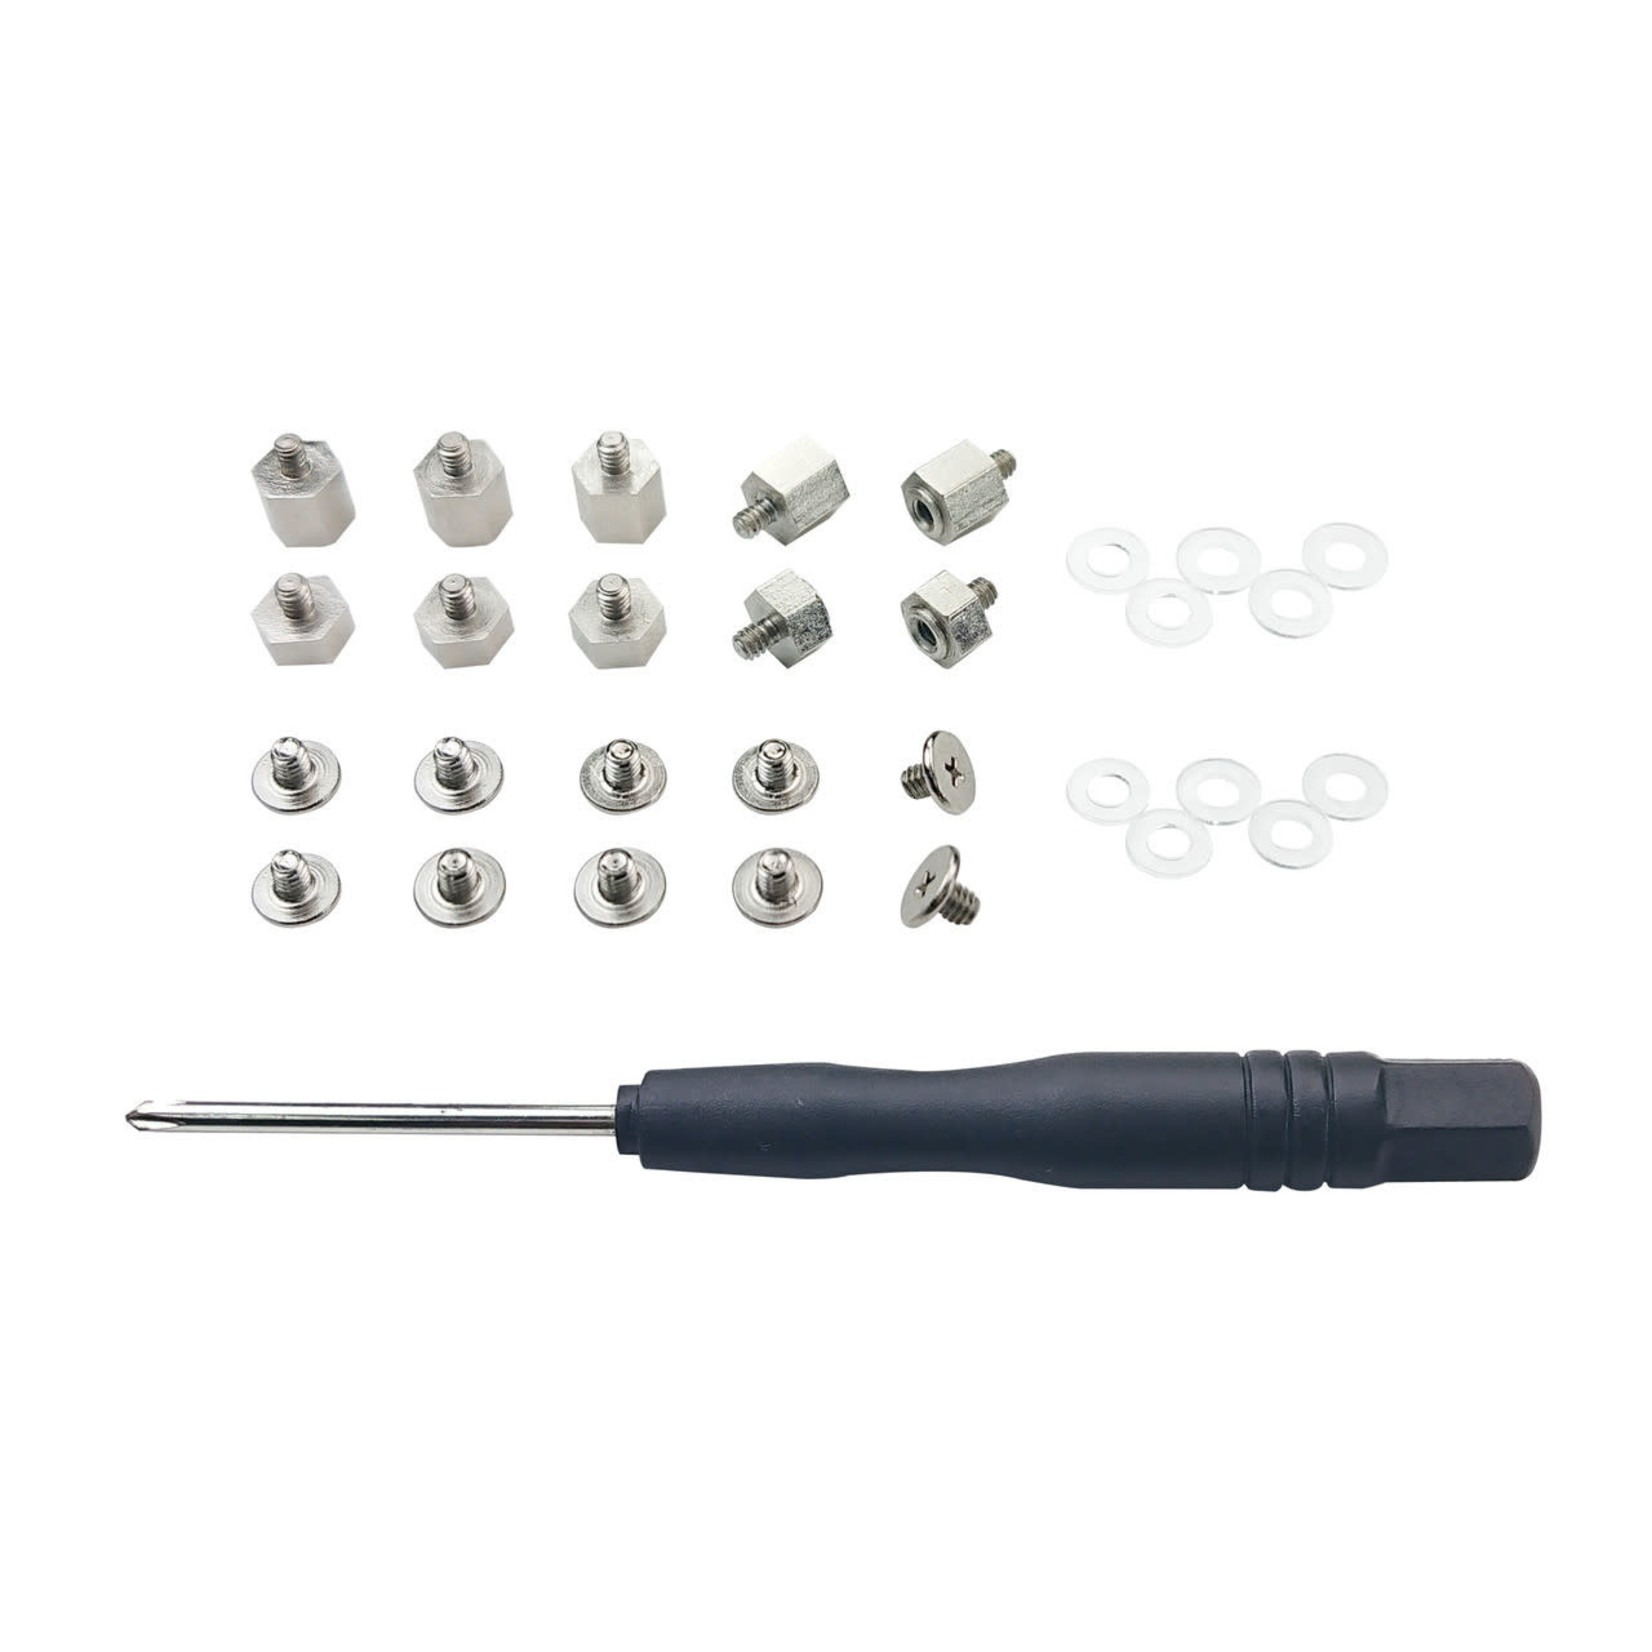 Micro Connectors Micro Connectors M.2 SSD Mounting Screws Kit for Asus Motherboards